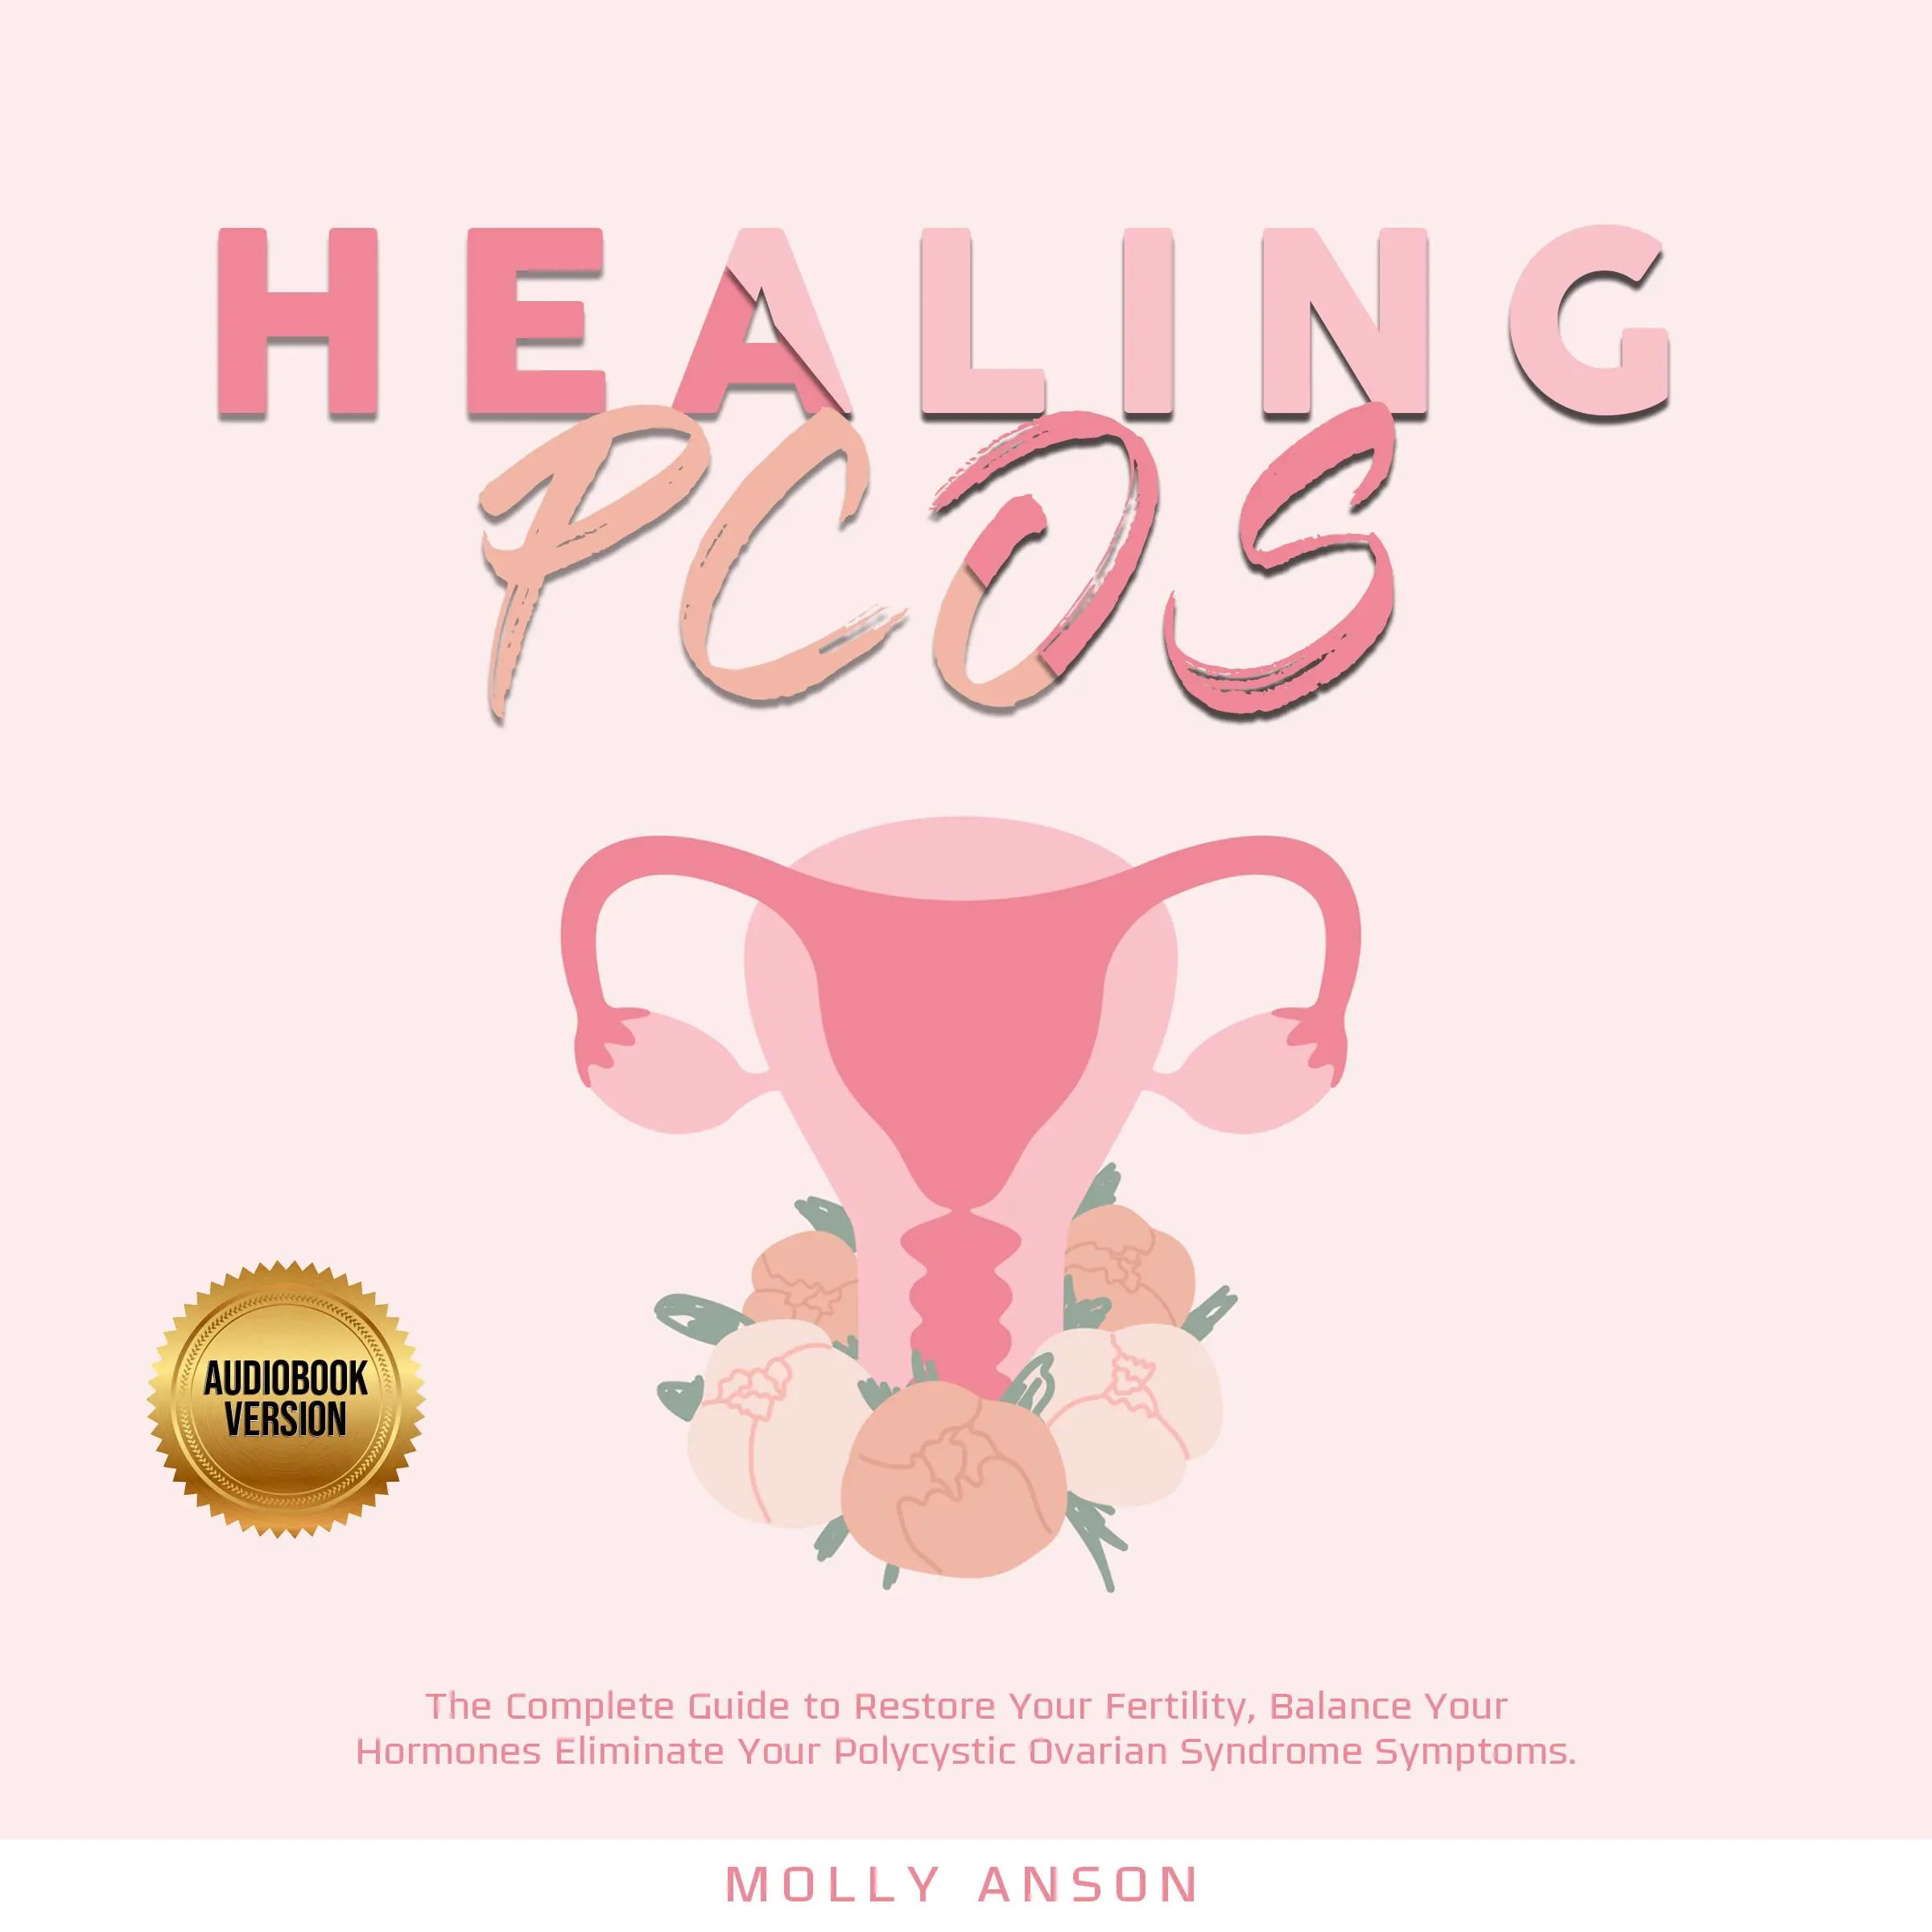 Healing PCOS Audiobook by Molly Anson